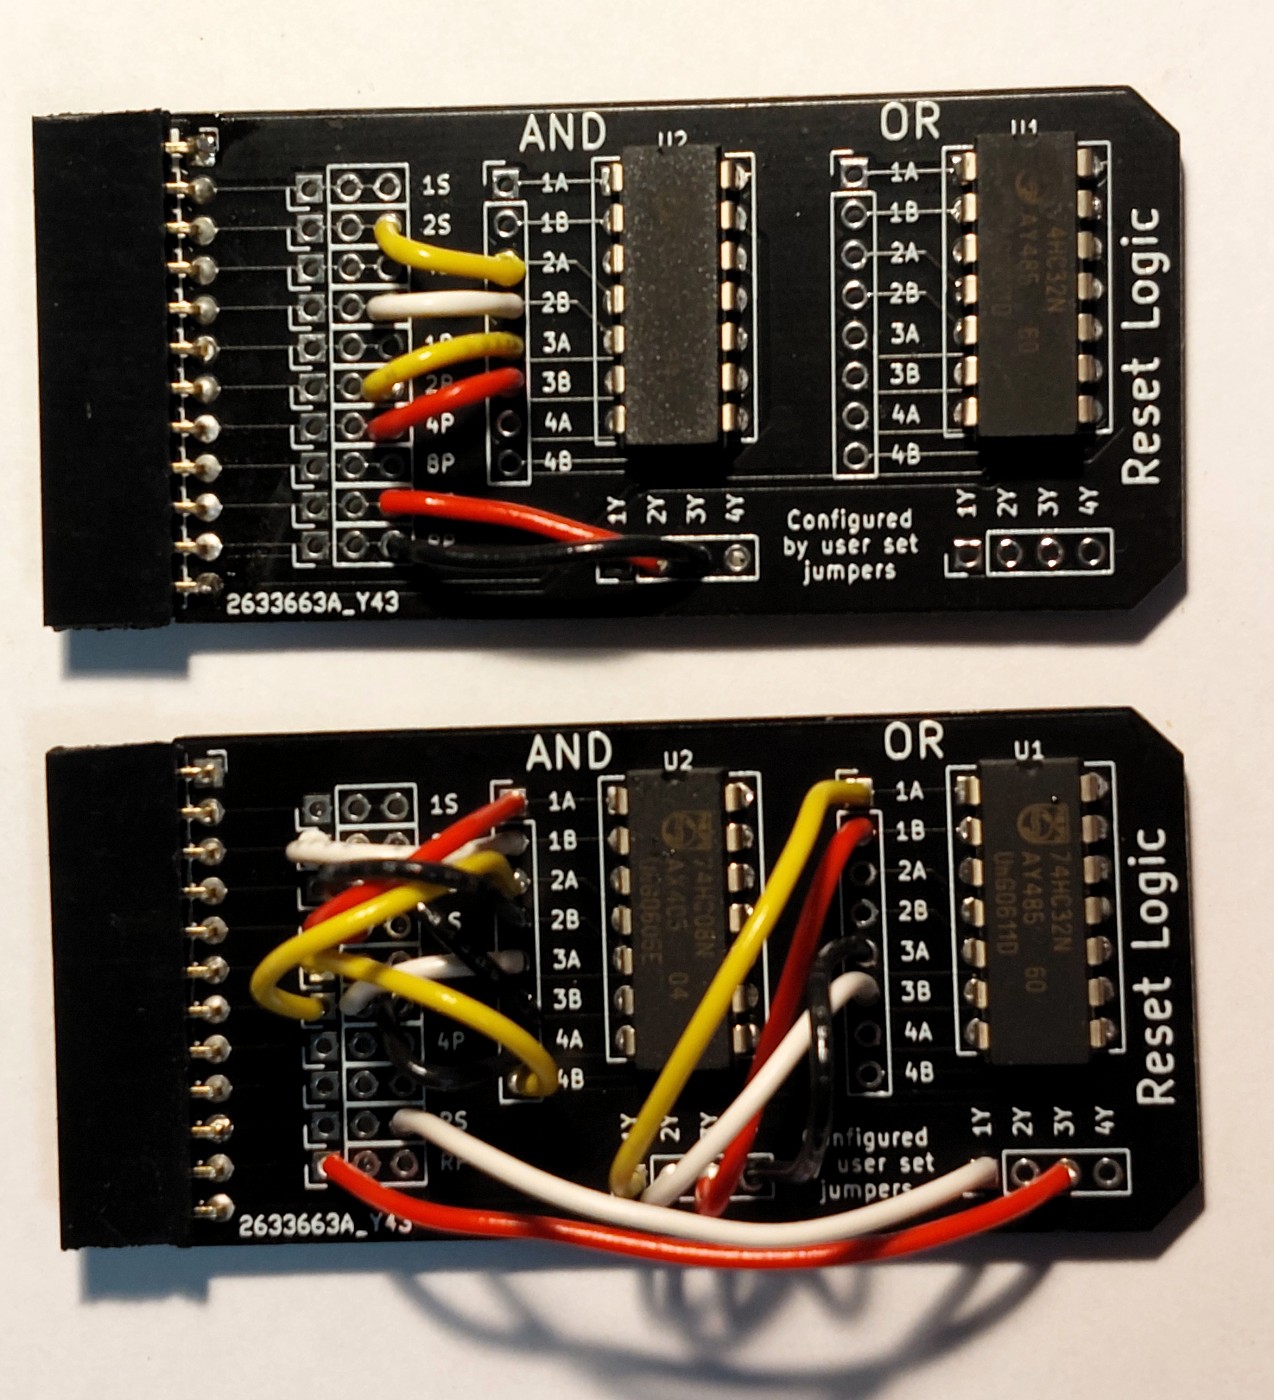 Comparison of the 60 and 24 reset logic modules side by side. 24 on the left, 60 on the right.